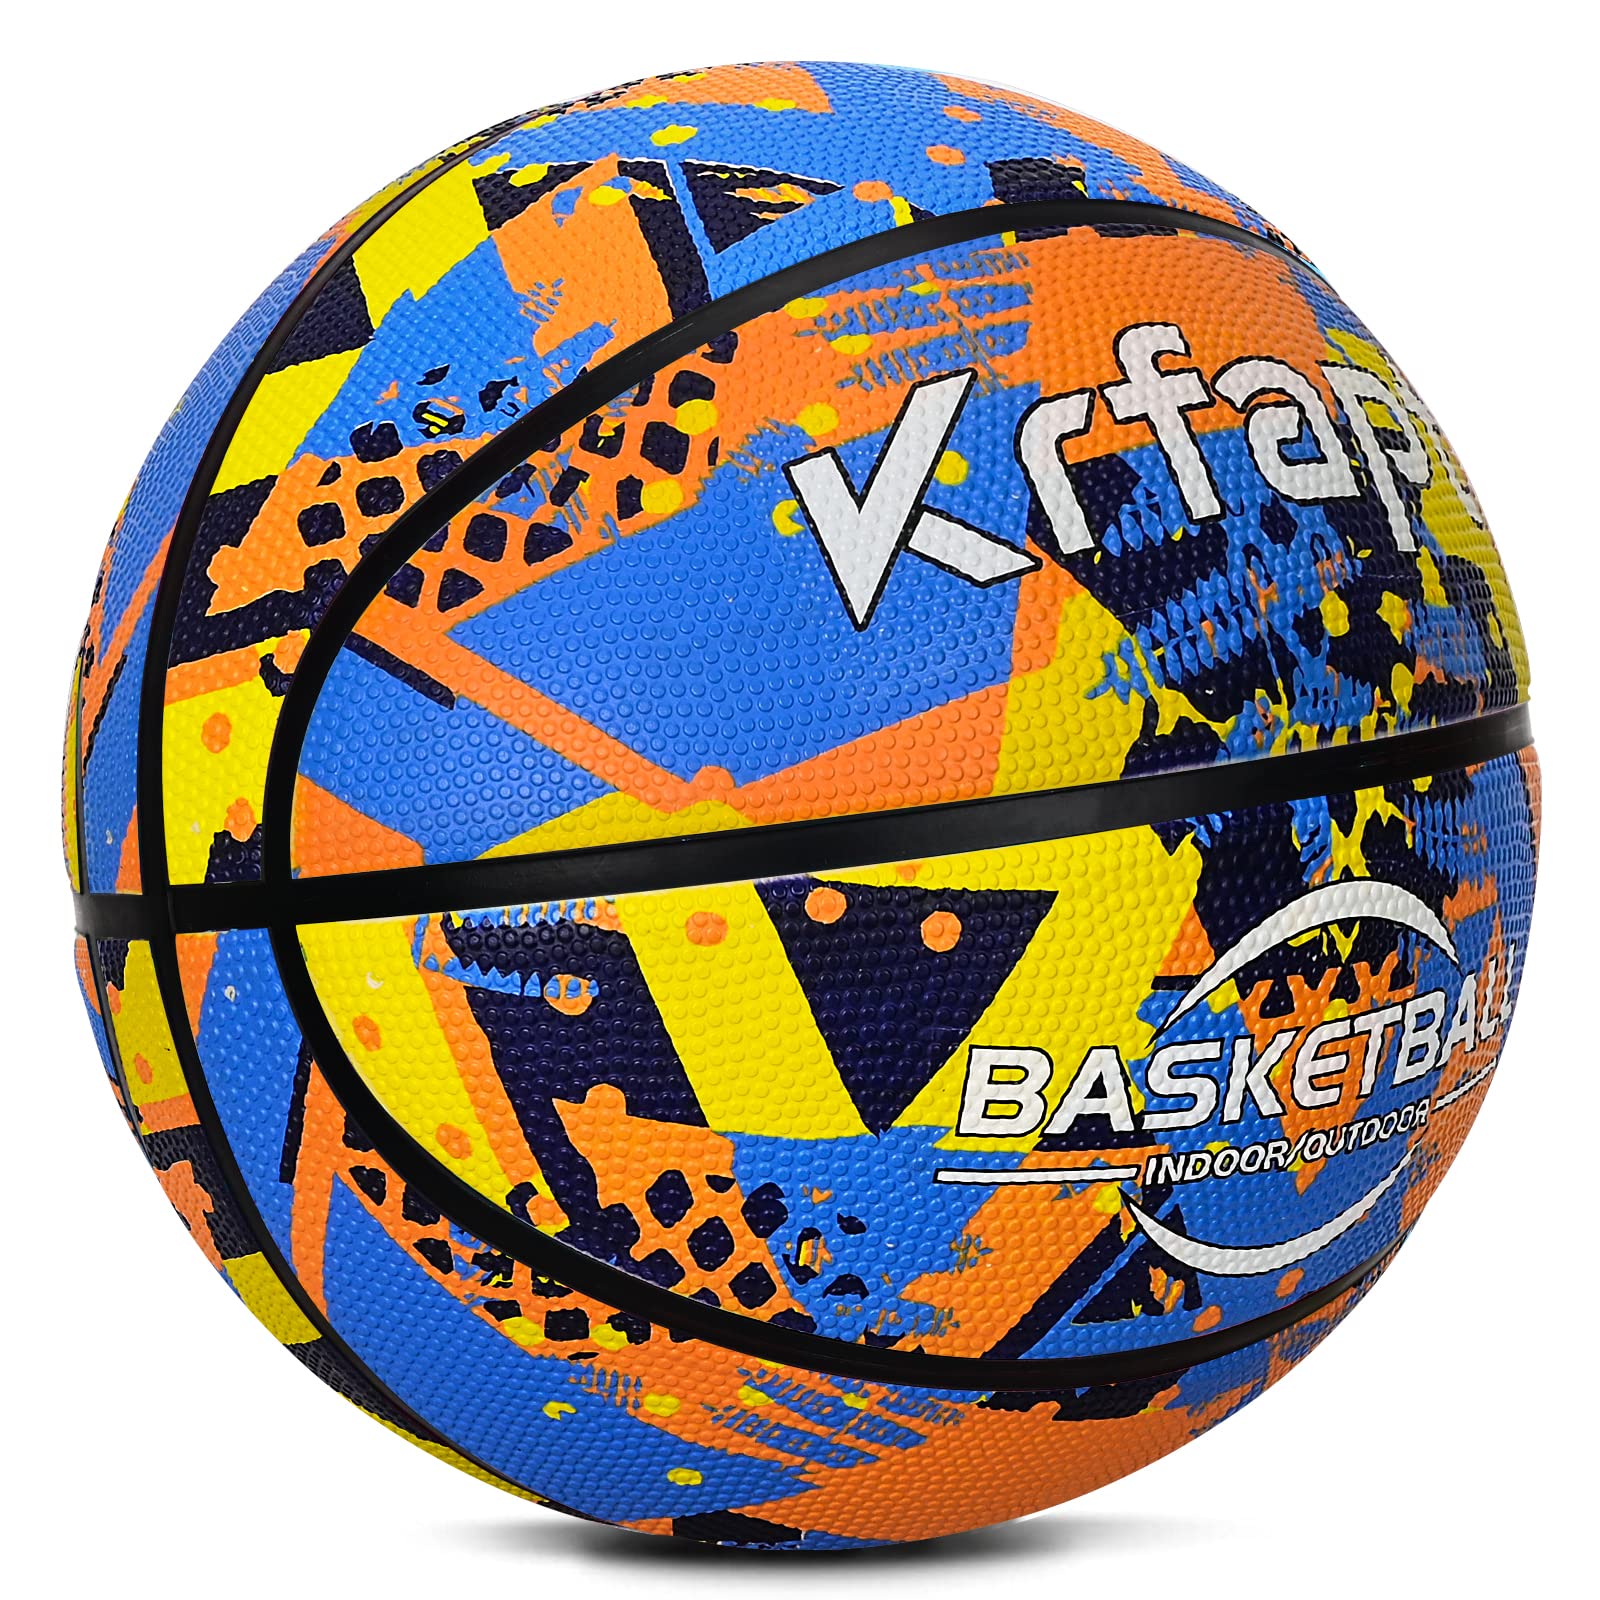 Official Youth Outdoor Basketball, Size 5